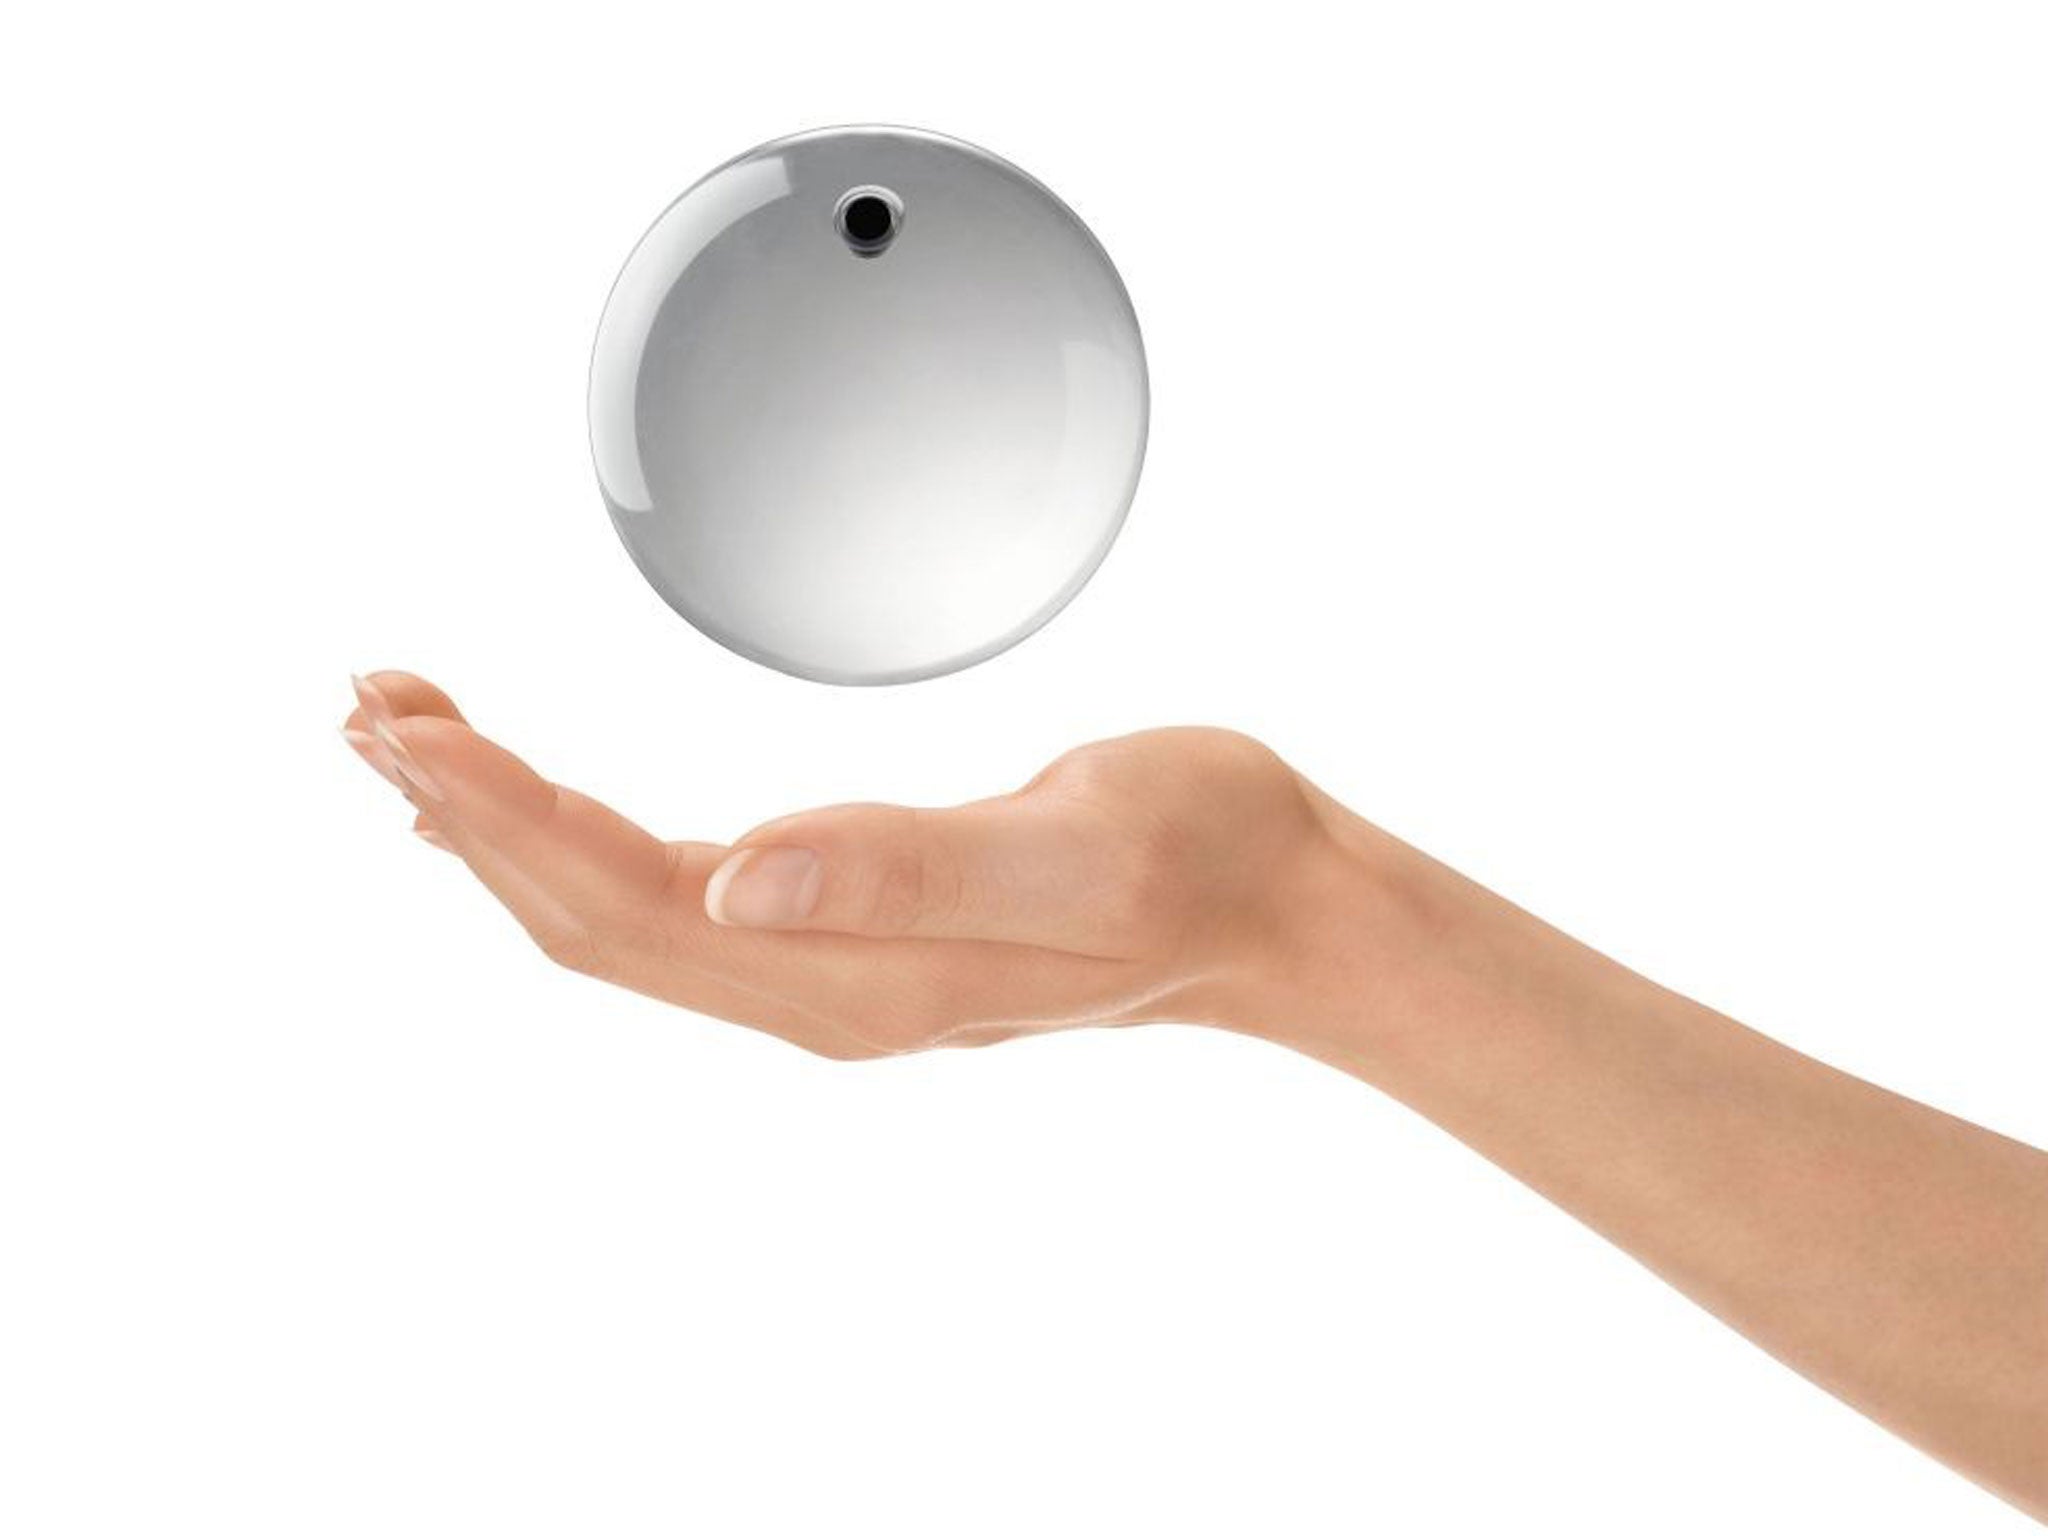 A picture showing Obalon, a new weight loss balloon that can be swallowed in a pill, and has been launched across the UK